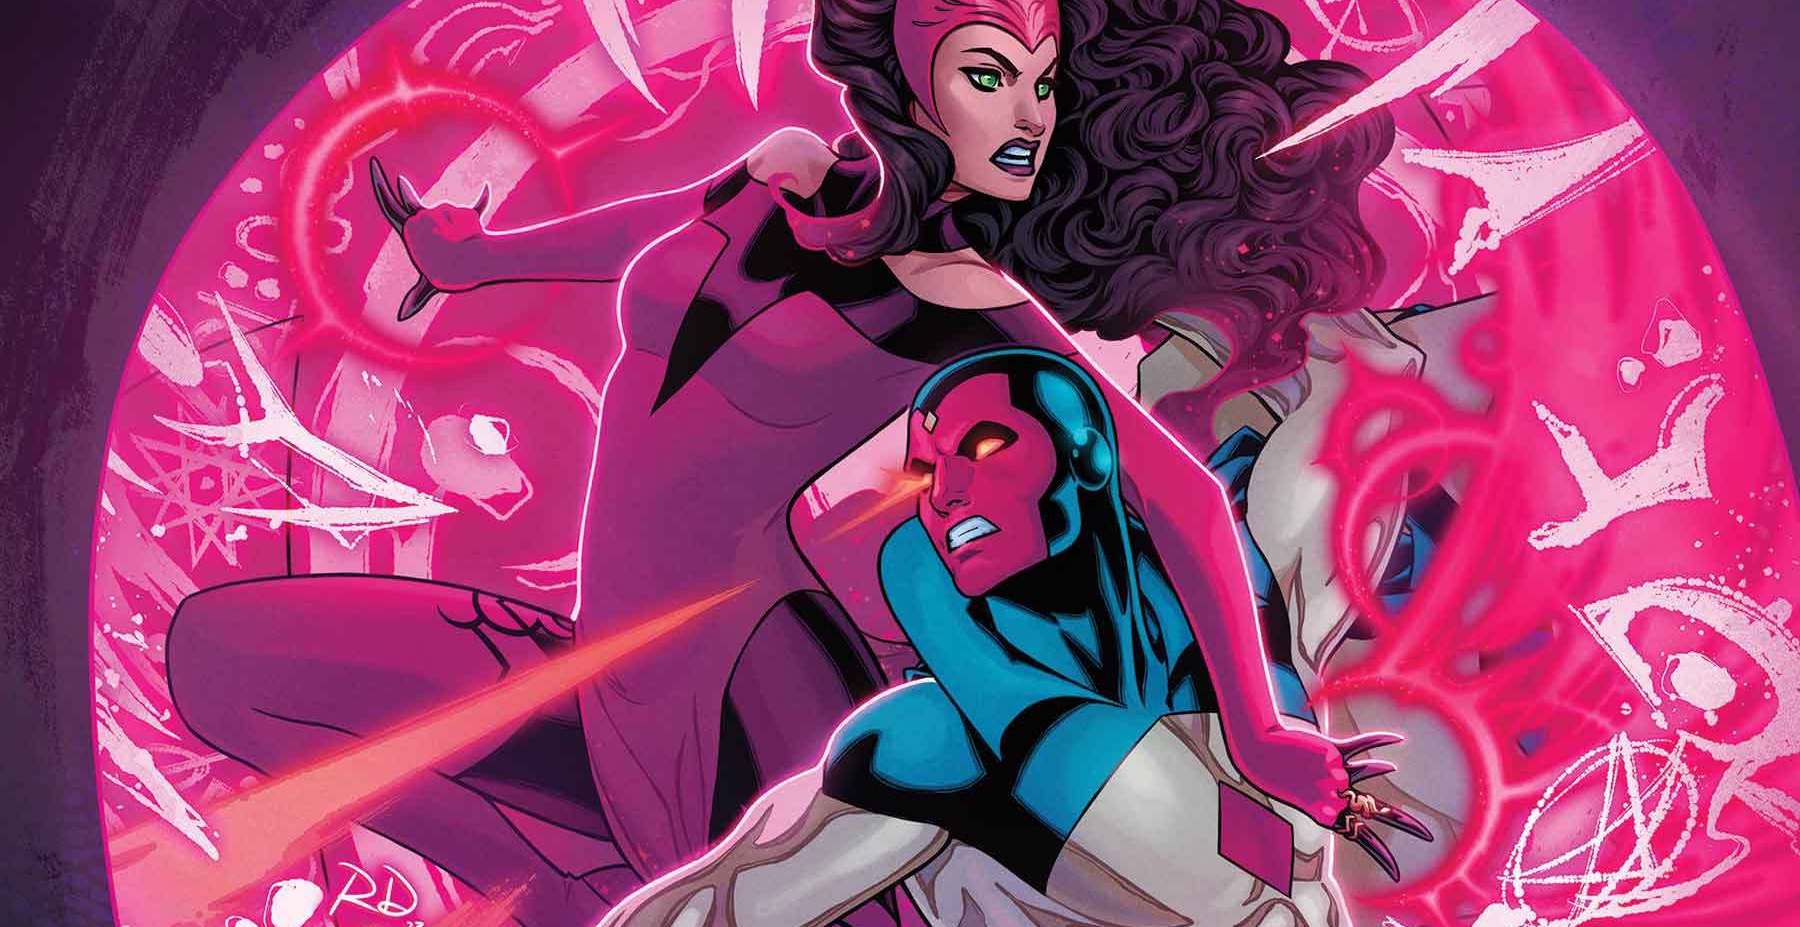 EXCLUSIVE Marvel First Look: Scarlet Witch & Quicksilver #2